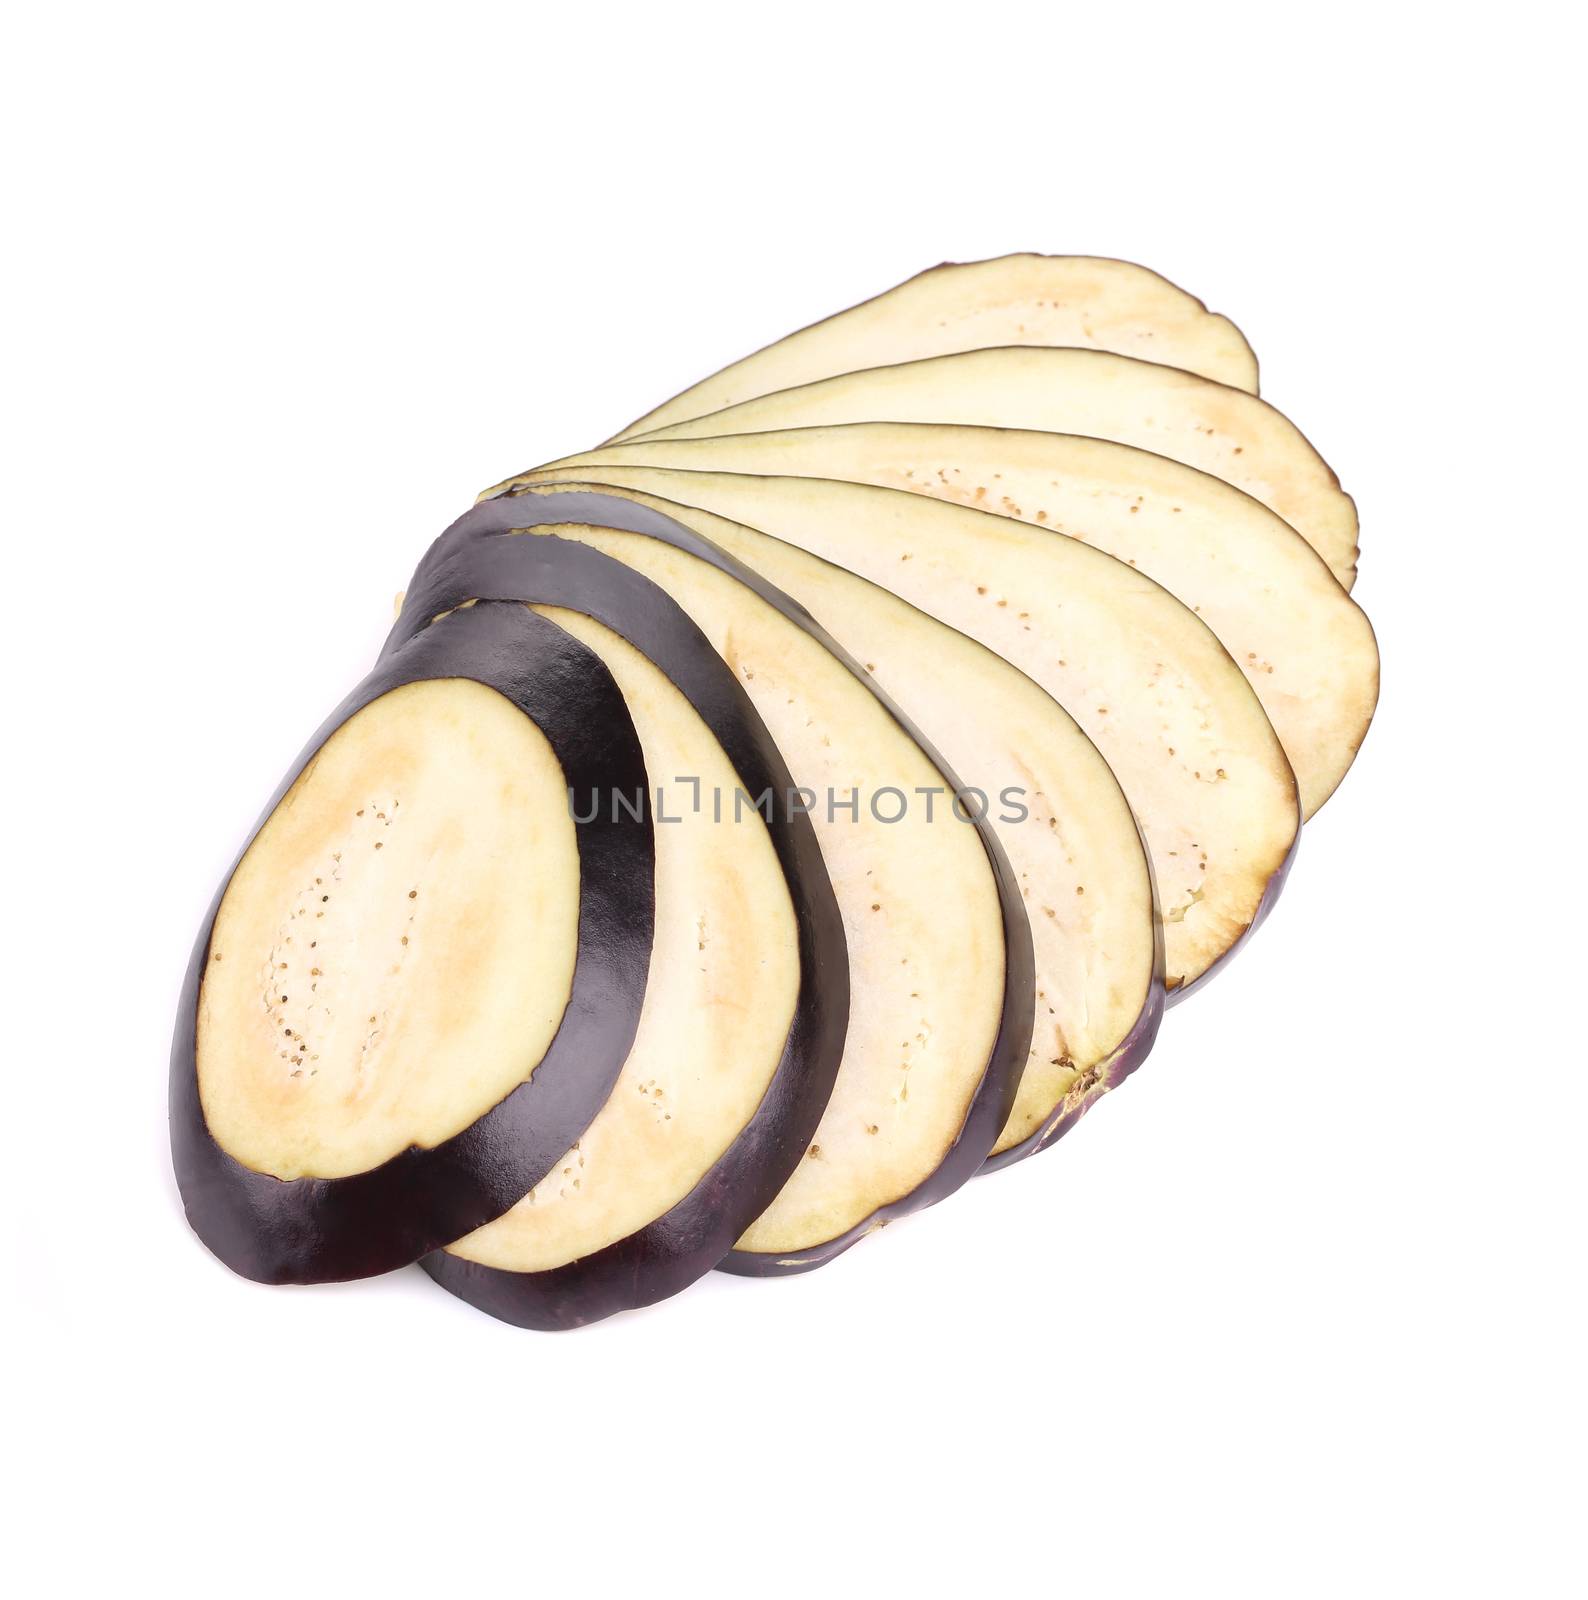 Sliced eggplant. Isolated on a white background.